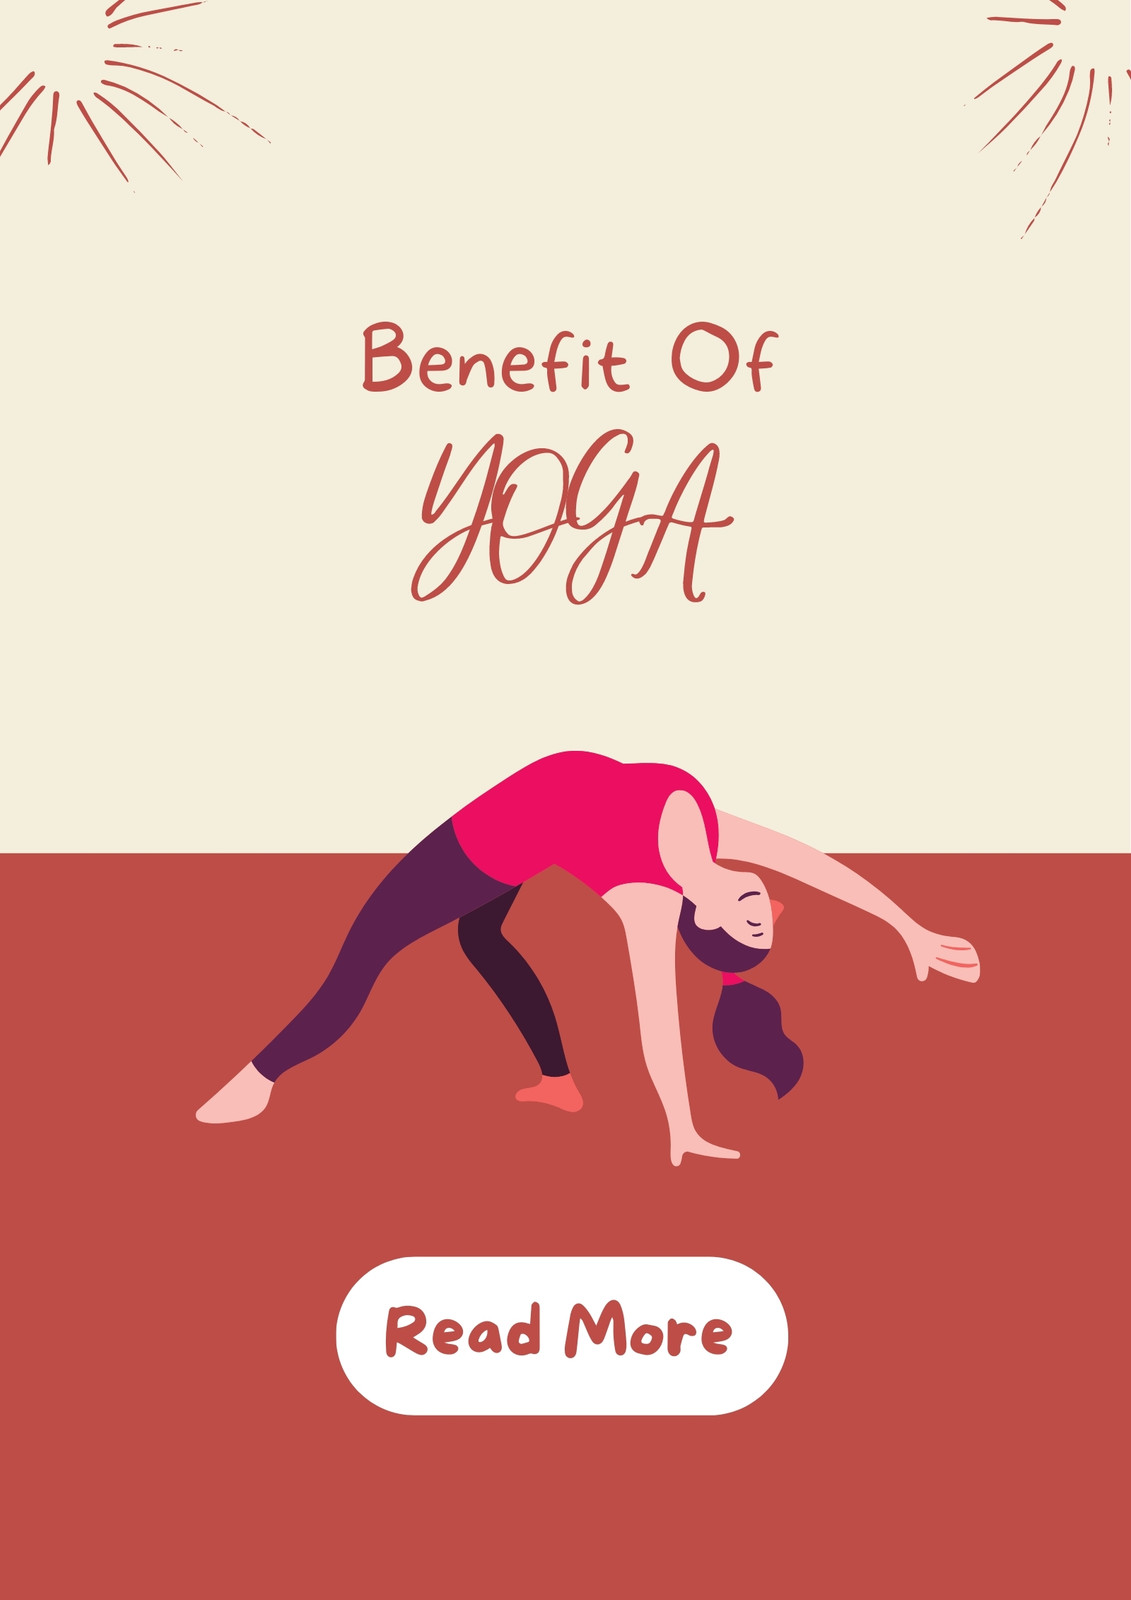 Benefits of Yoga Poster Health and Wellbeing Fitness Meditation Mind, Body  & Spirit Wall Decor A2, A3, A4 Wall Art Print Poster - Etsy